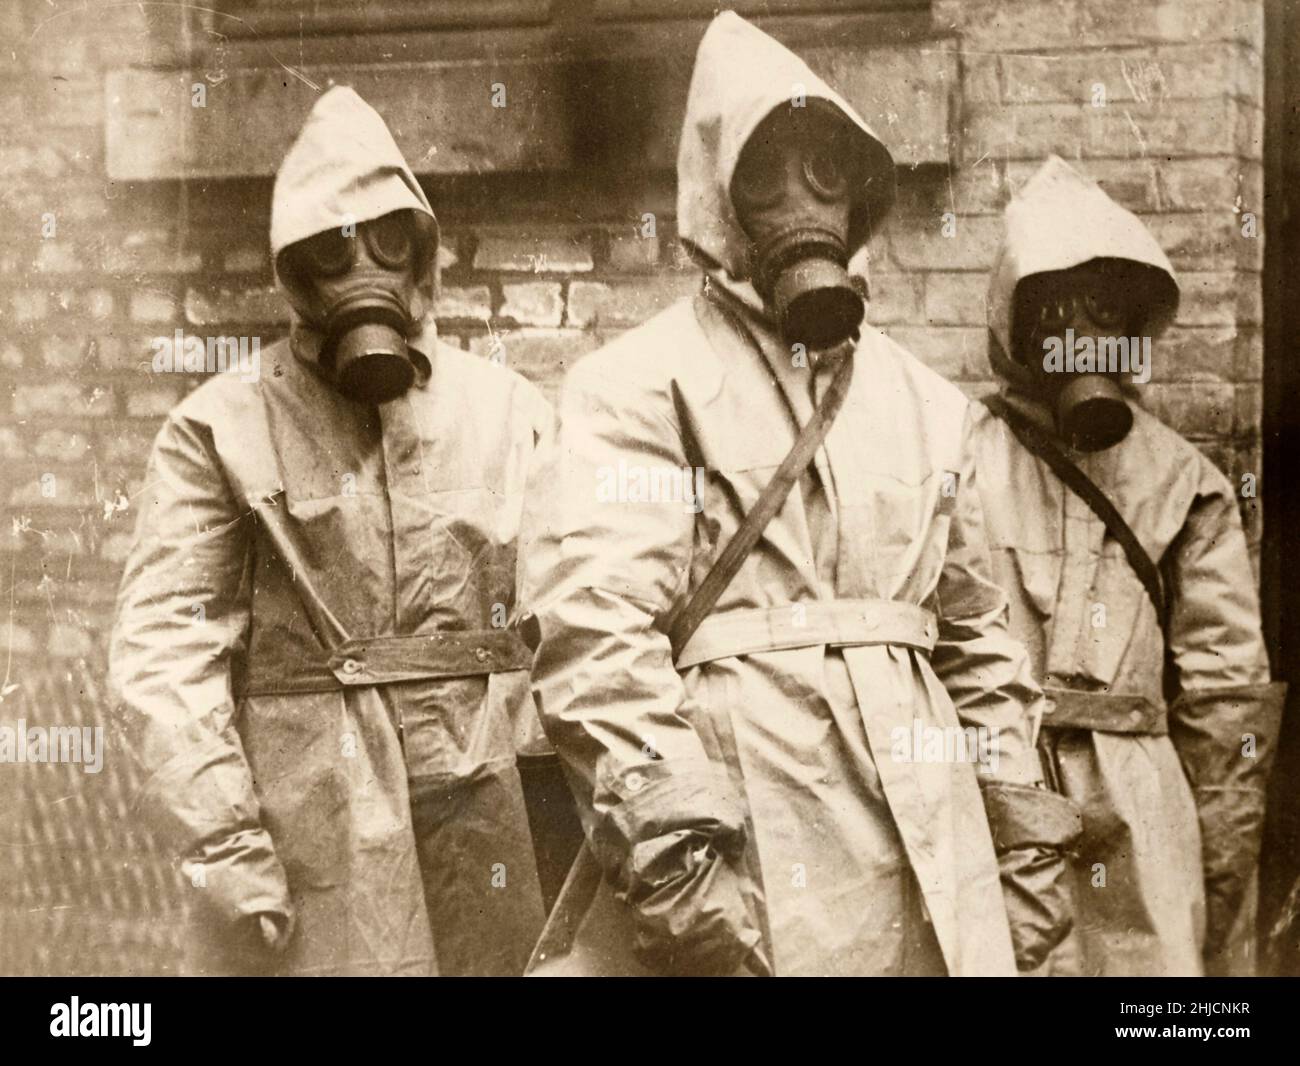 Three French army surgeons wearing gas masks in the course of their medical duties, WWI.  Circa 1917-18. Stock Photo